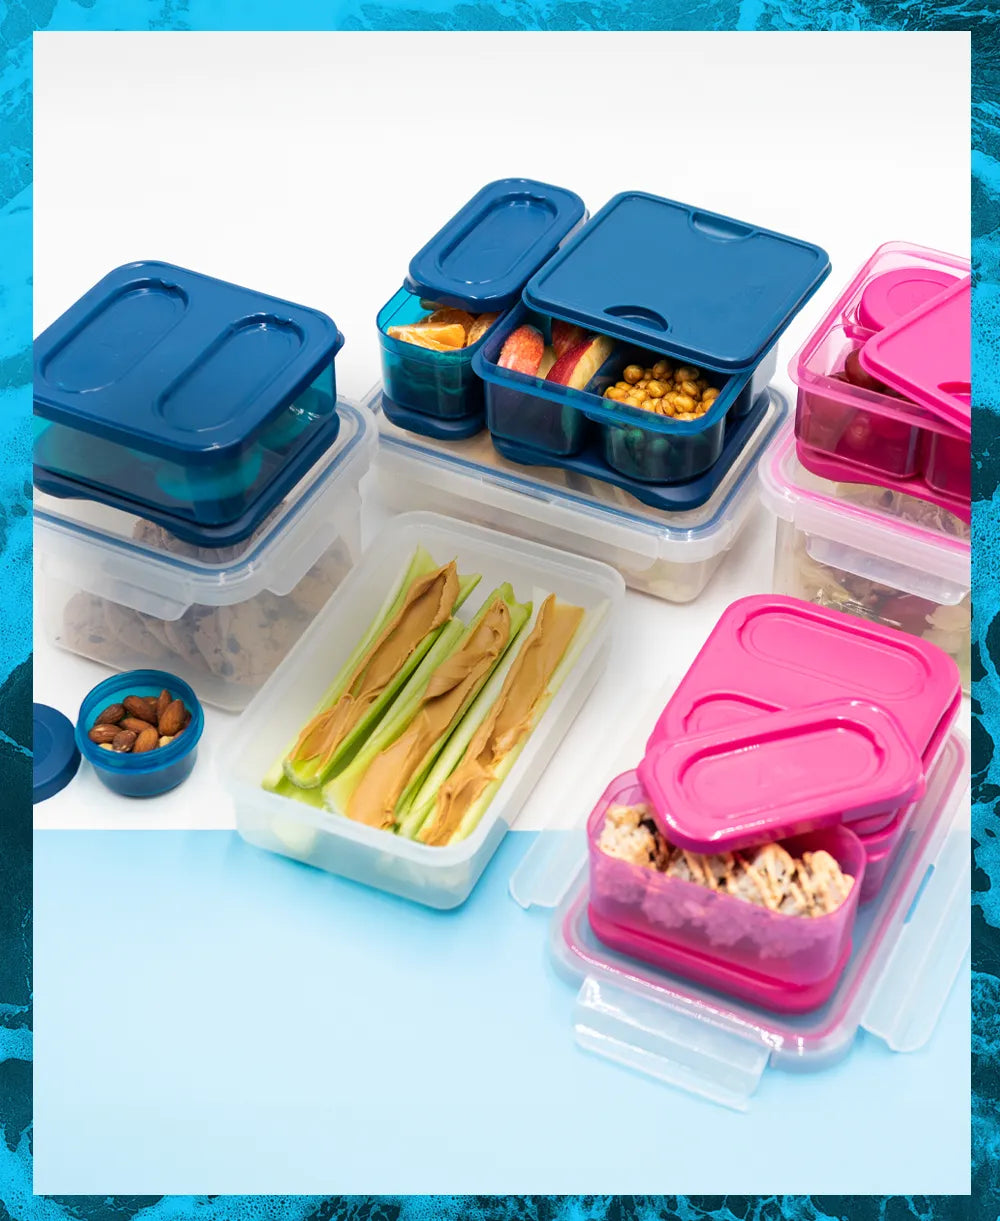 Lock & Lock 4-piece Container Set with Lunch Cooler Bag 